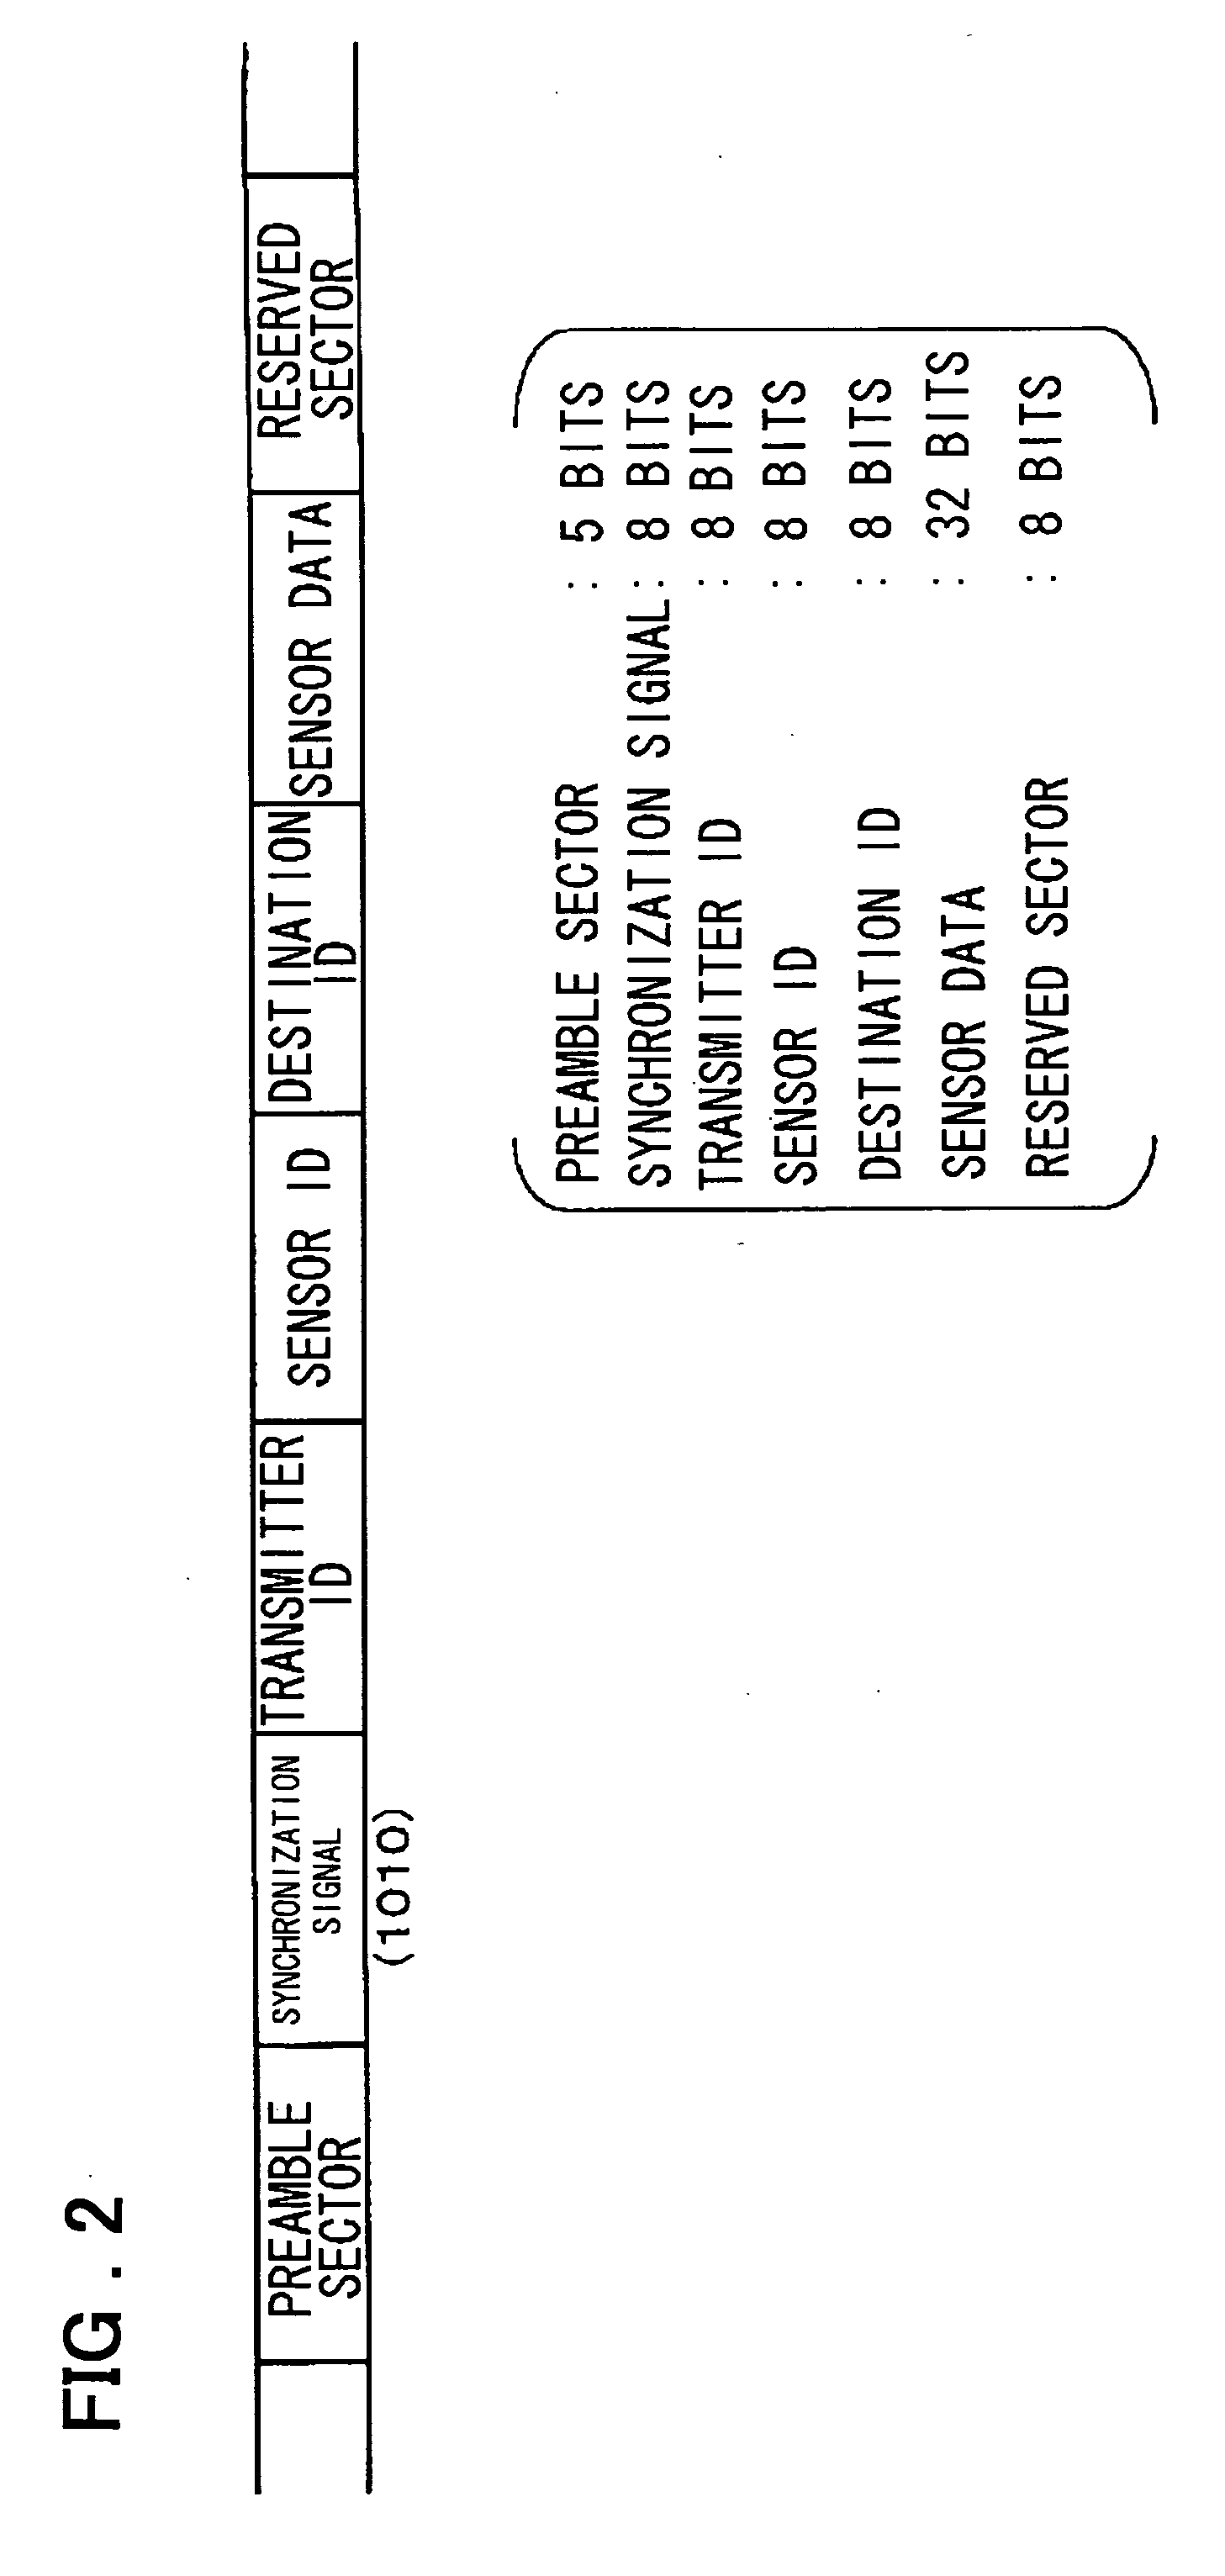 Physical quantity monitoring and control system and portable information terminal used for the same